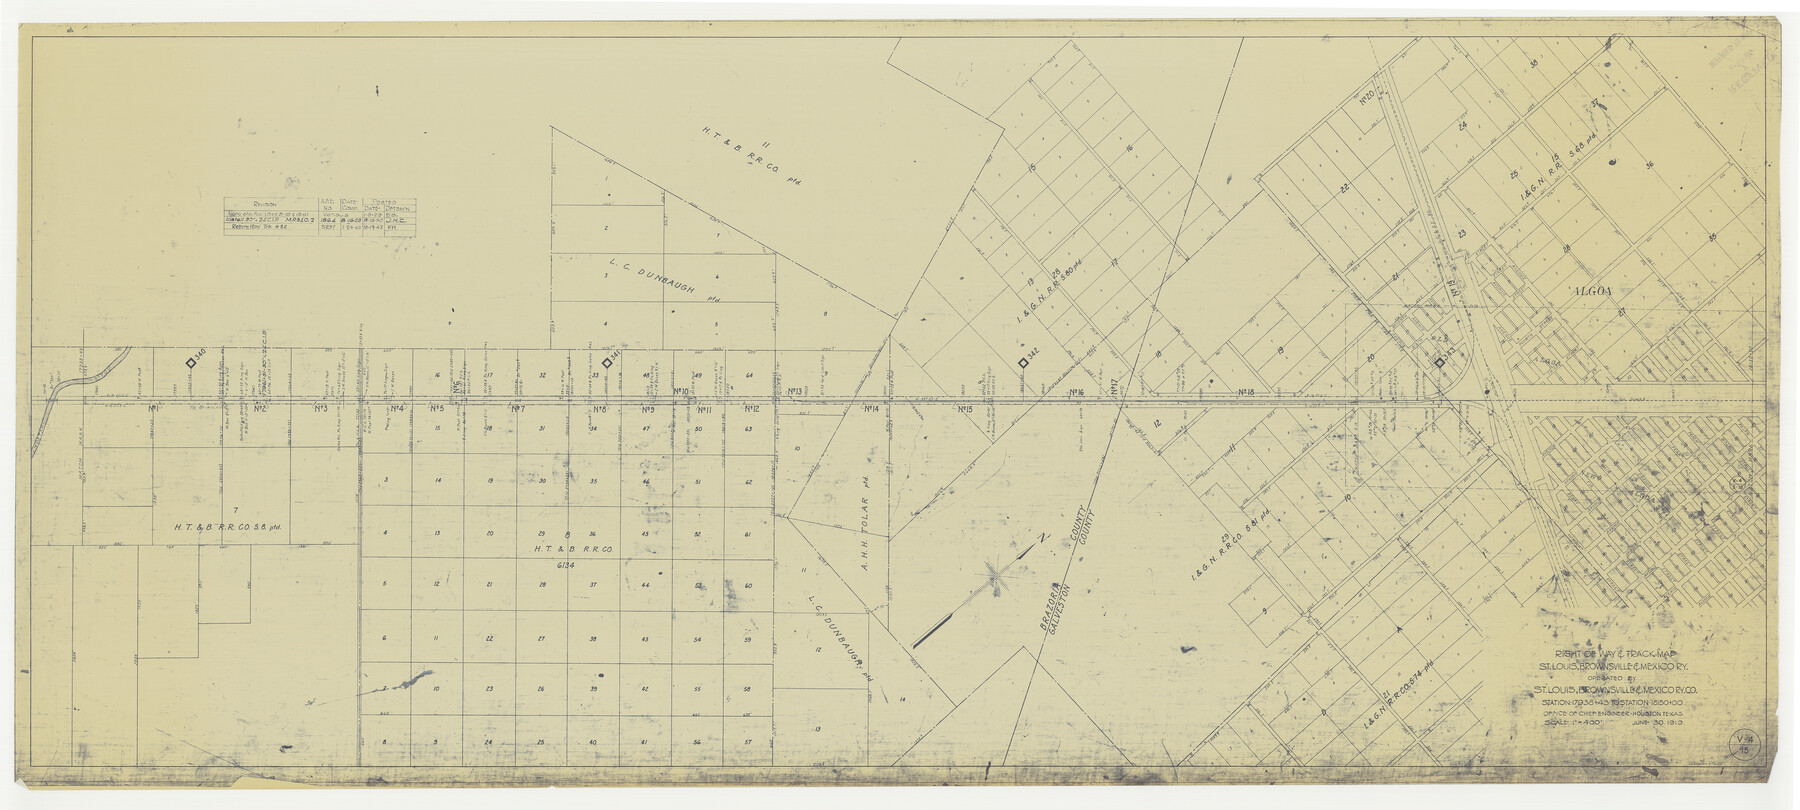 64625, Right of Way & Track Map, St. Louis, Brownsville & Mexico Ry. operated by St. Louis, Brownsville & Mexico Ry. Co., General Map Collection